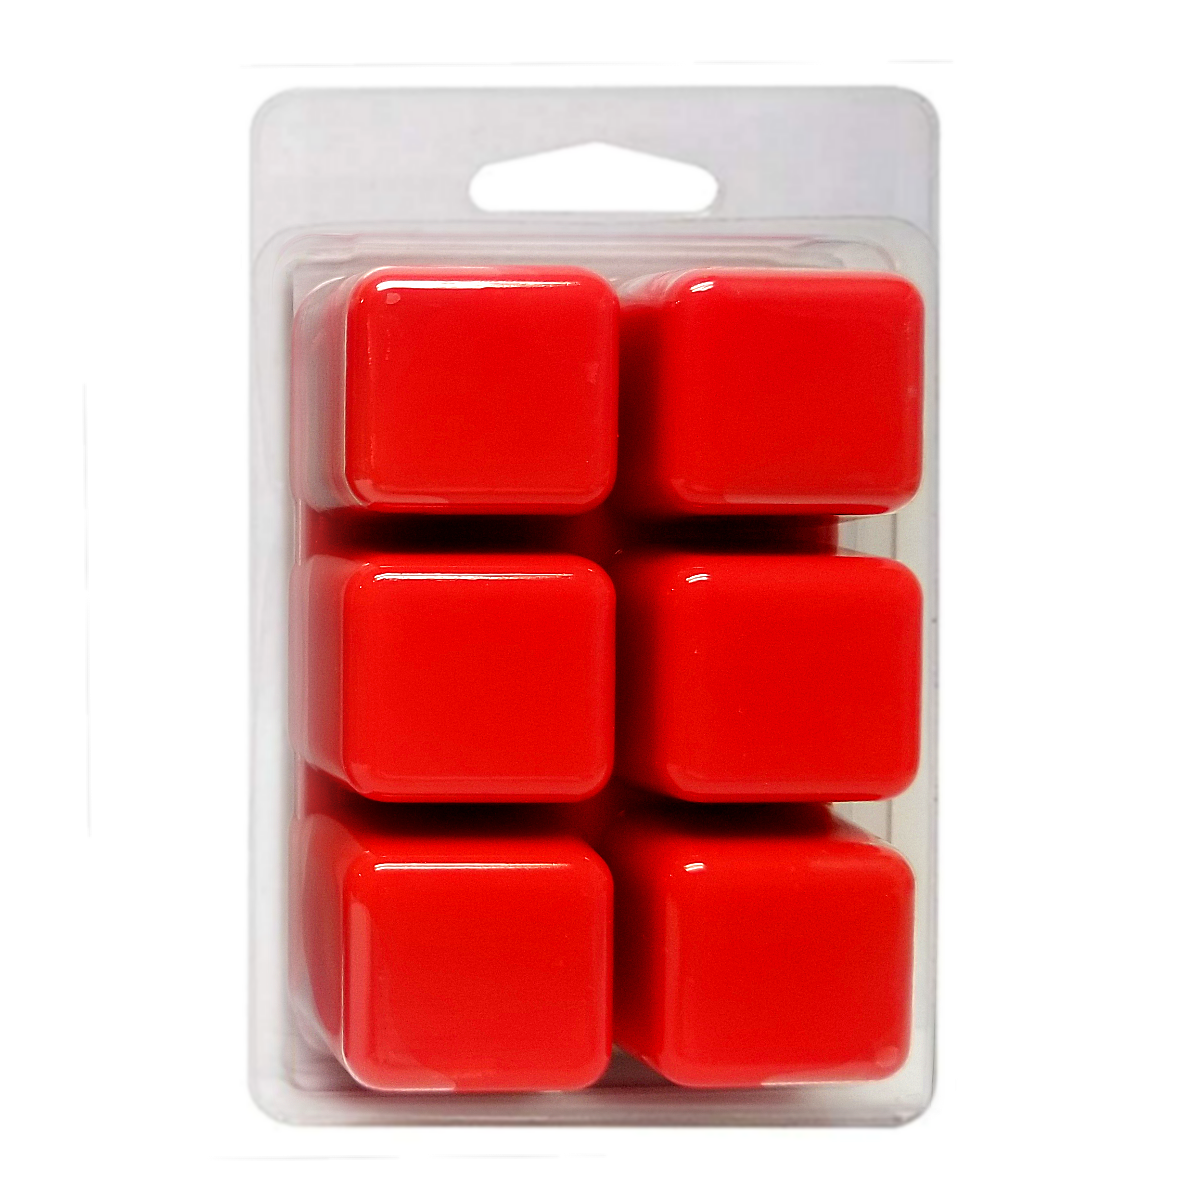 Sweet Strawberry - 3.2 oz Clamshell